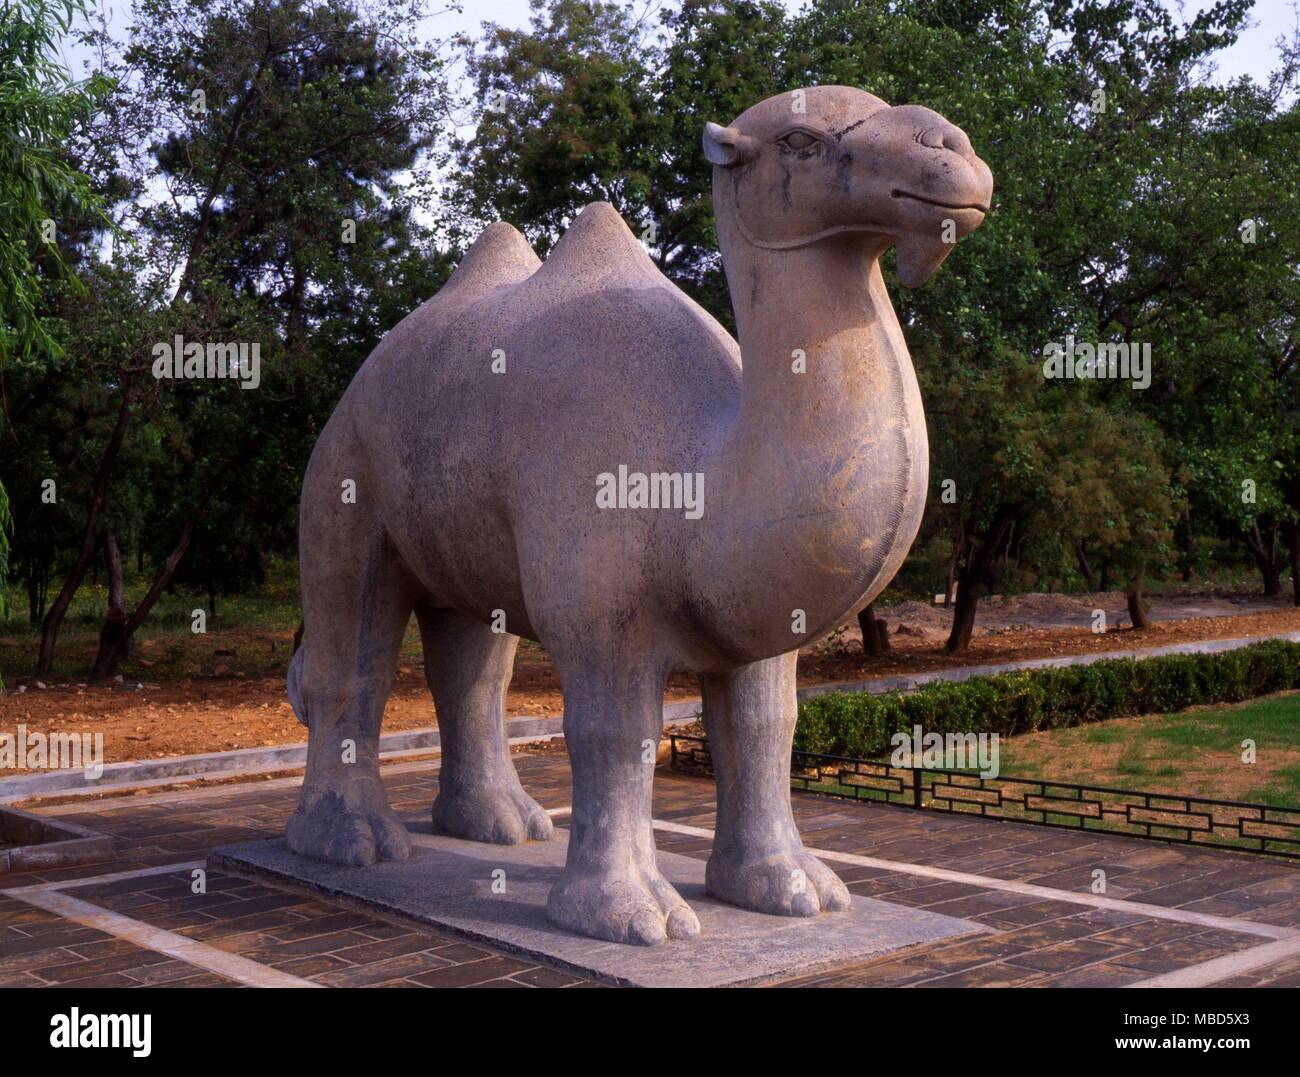 CHINA - DROMEDARY NEAR MING TOMBS, BEIJING on the sacred way leading to the Ming Tombs, Bejing. Stock Photo